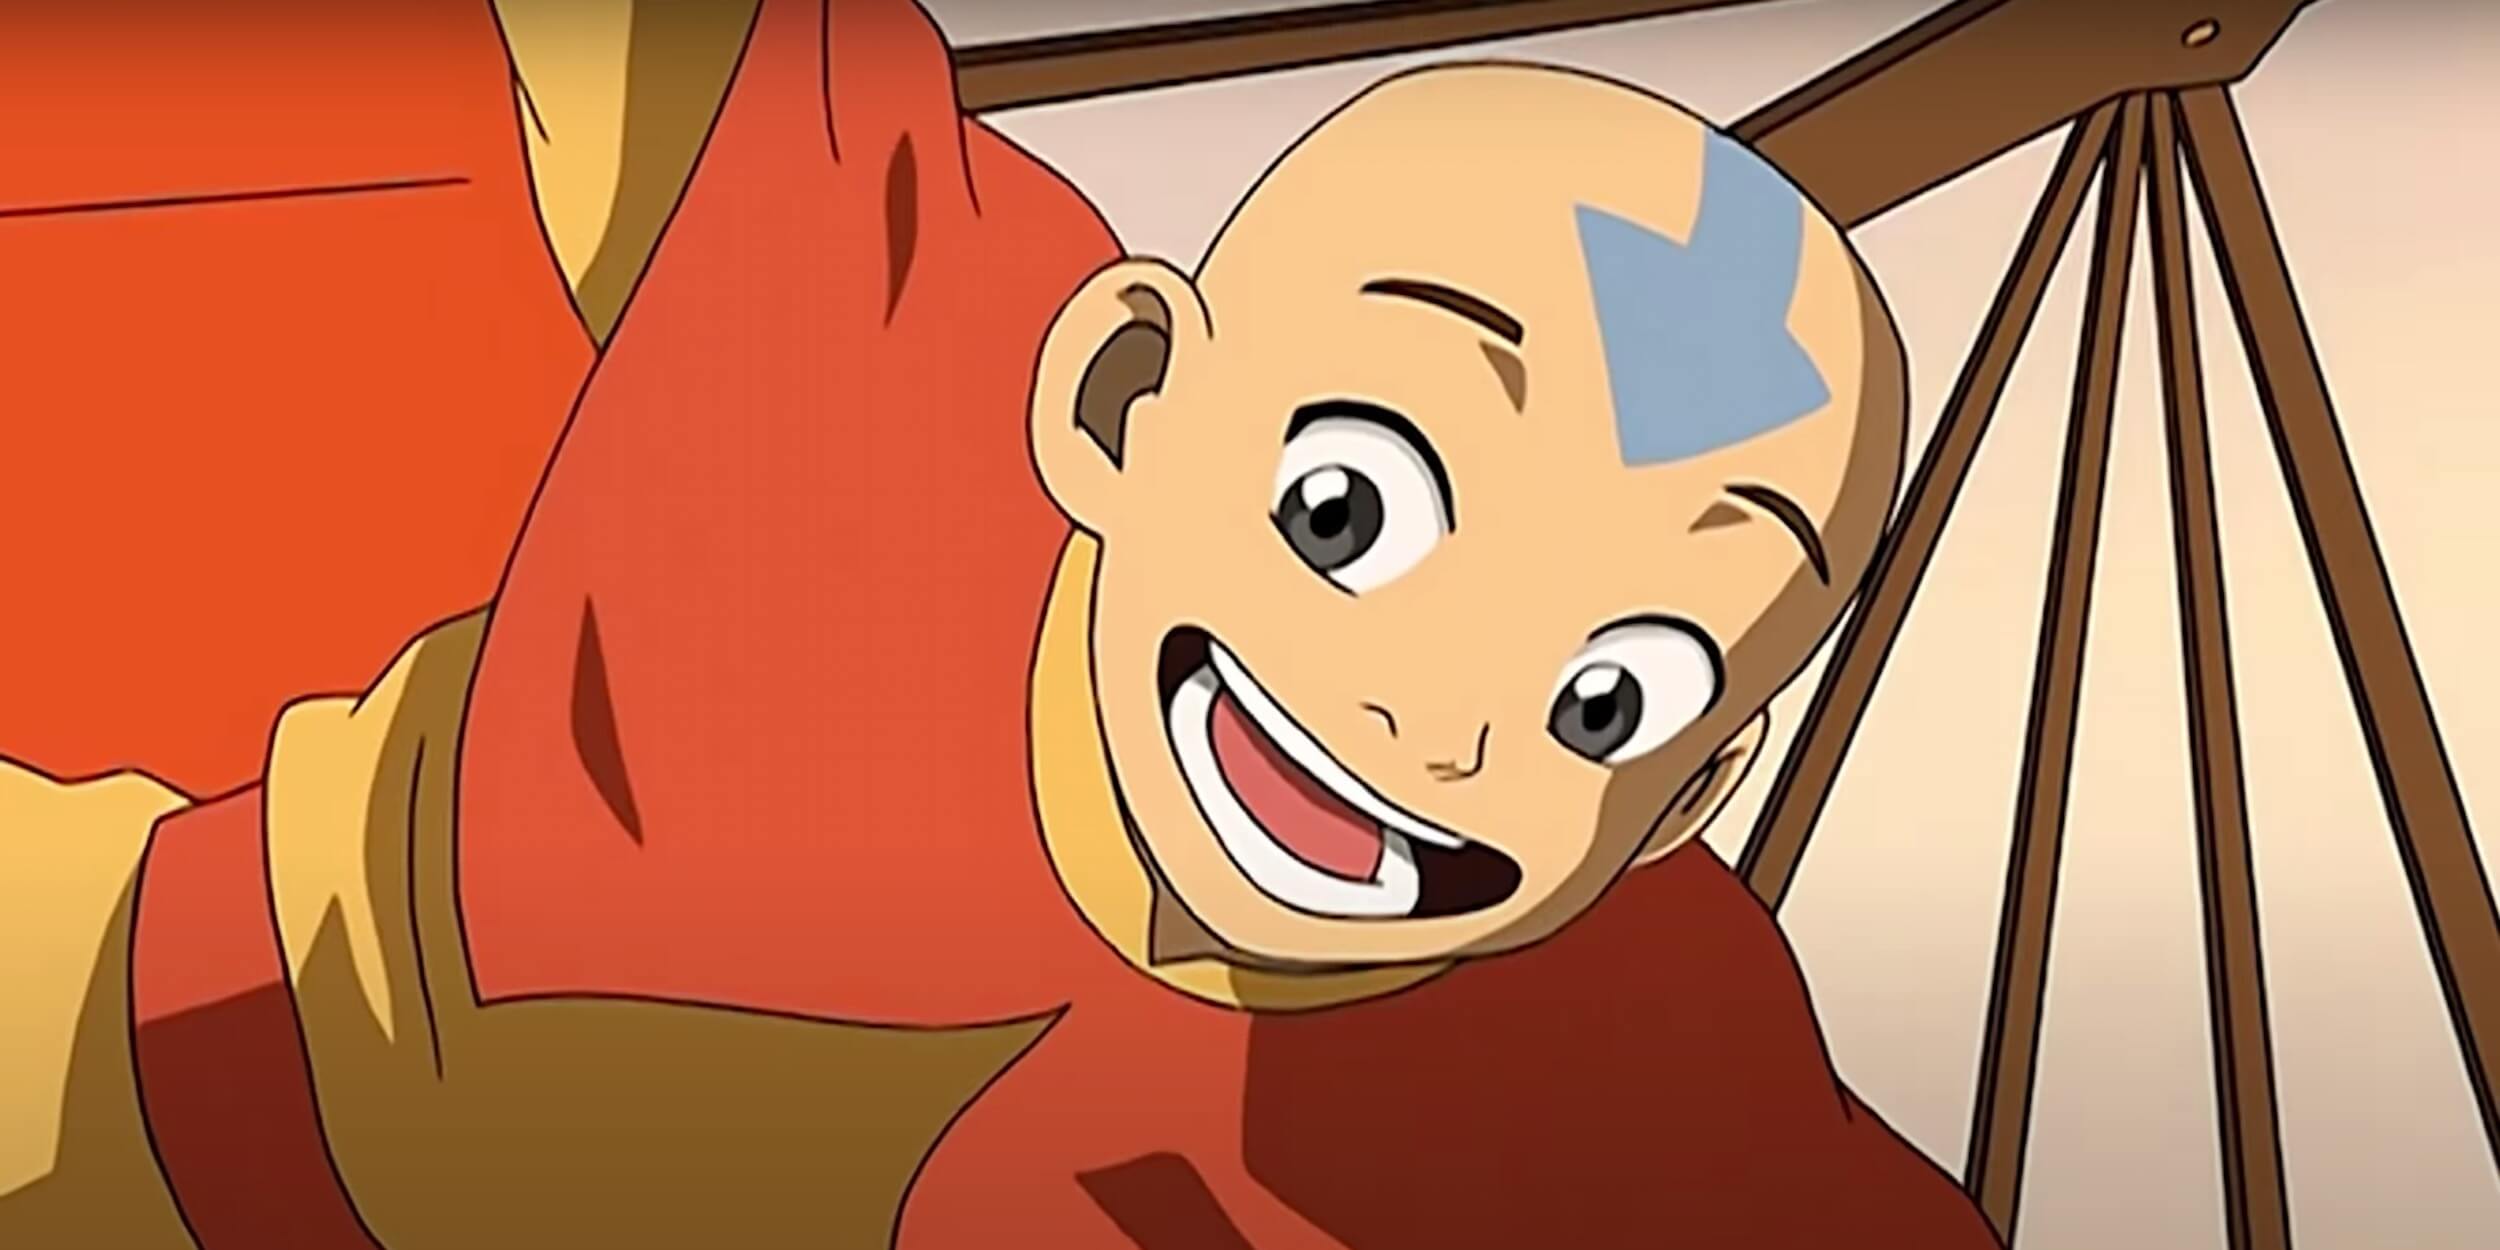 The Avatar The Last Airbender Film Takes Place 10 Years After the Show   Anime India